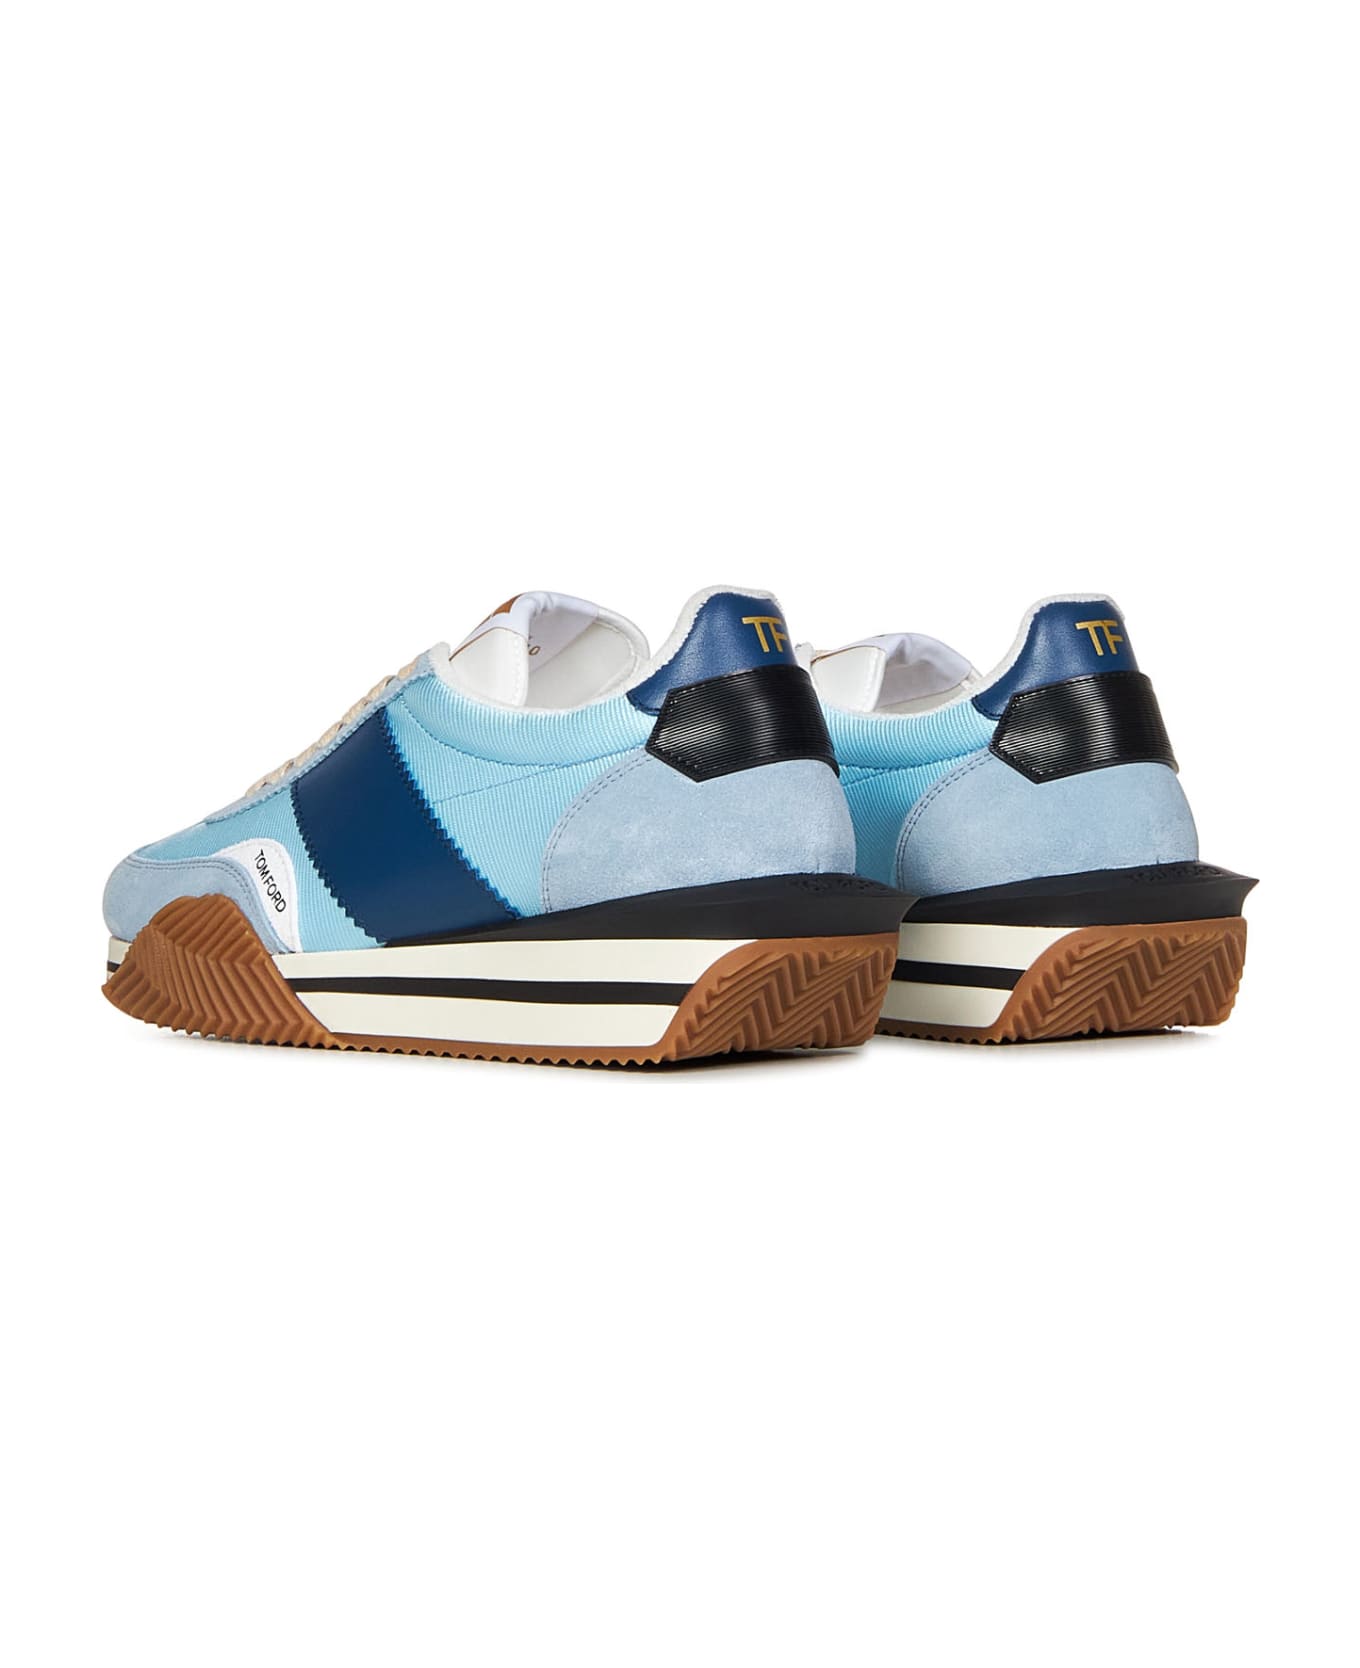 Tom Ford James Sneakers - Light blue